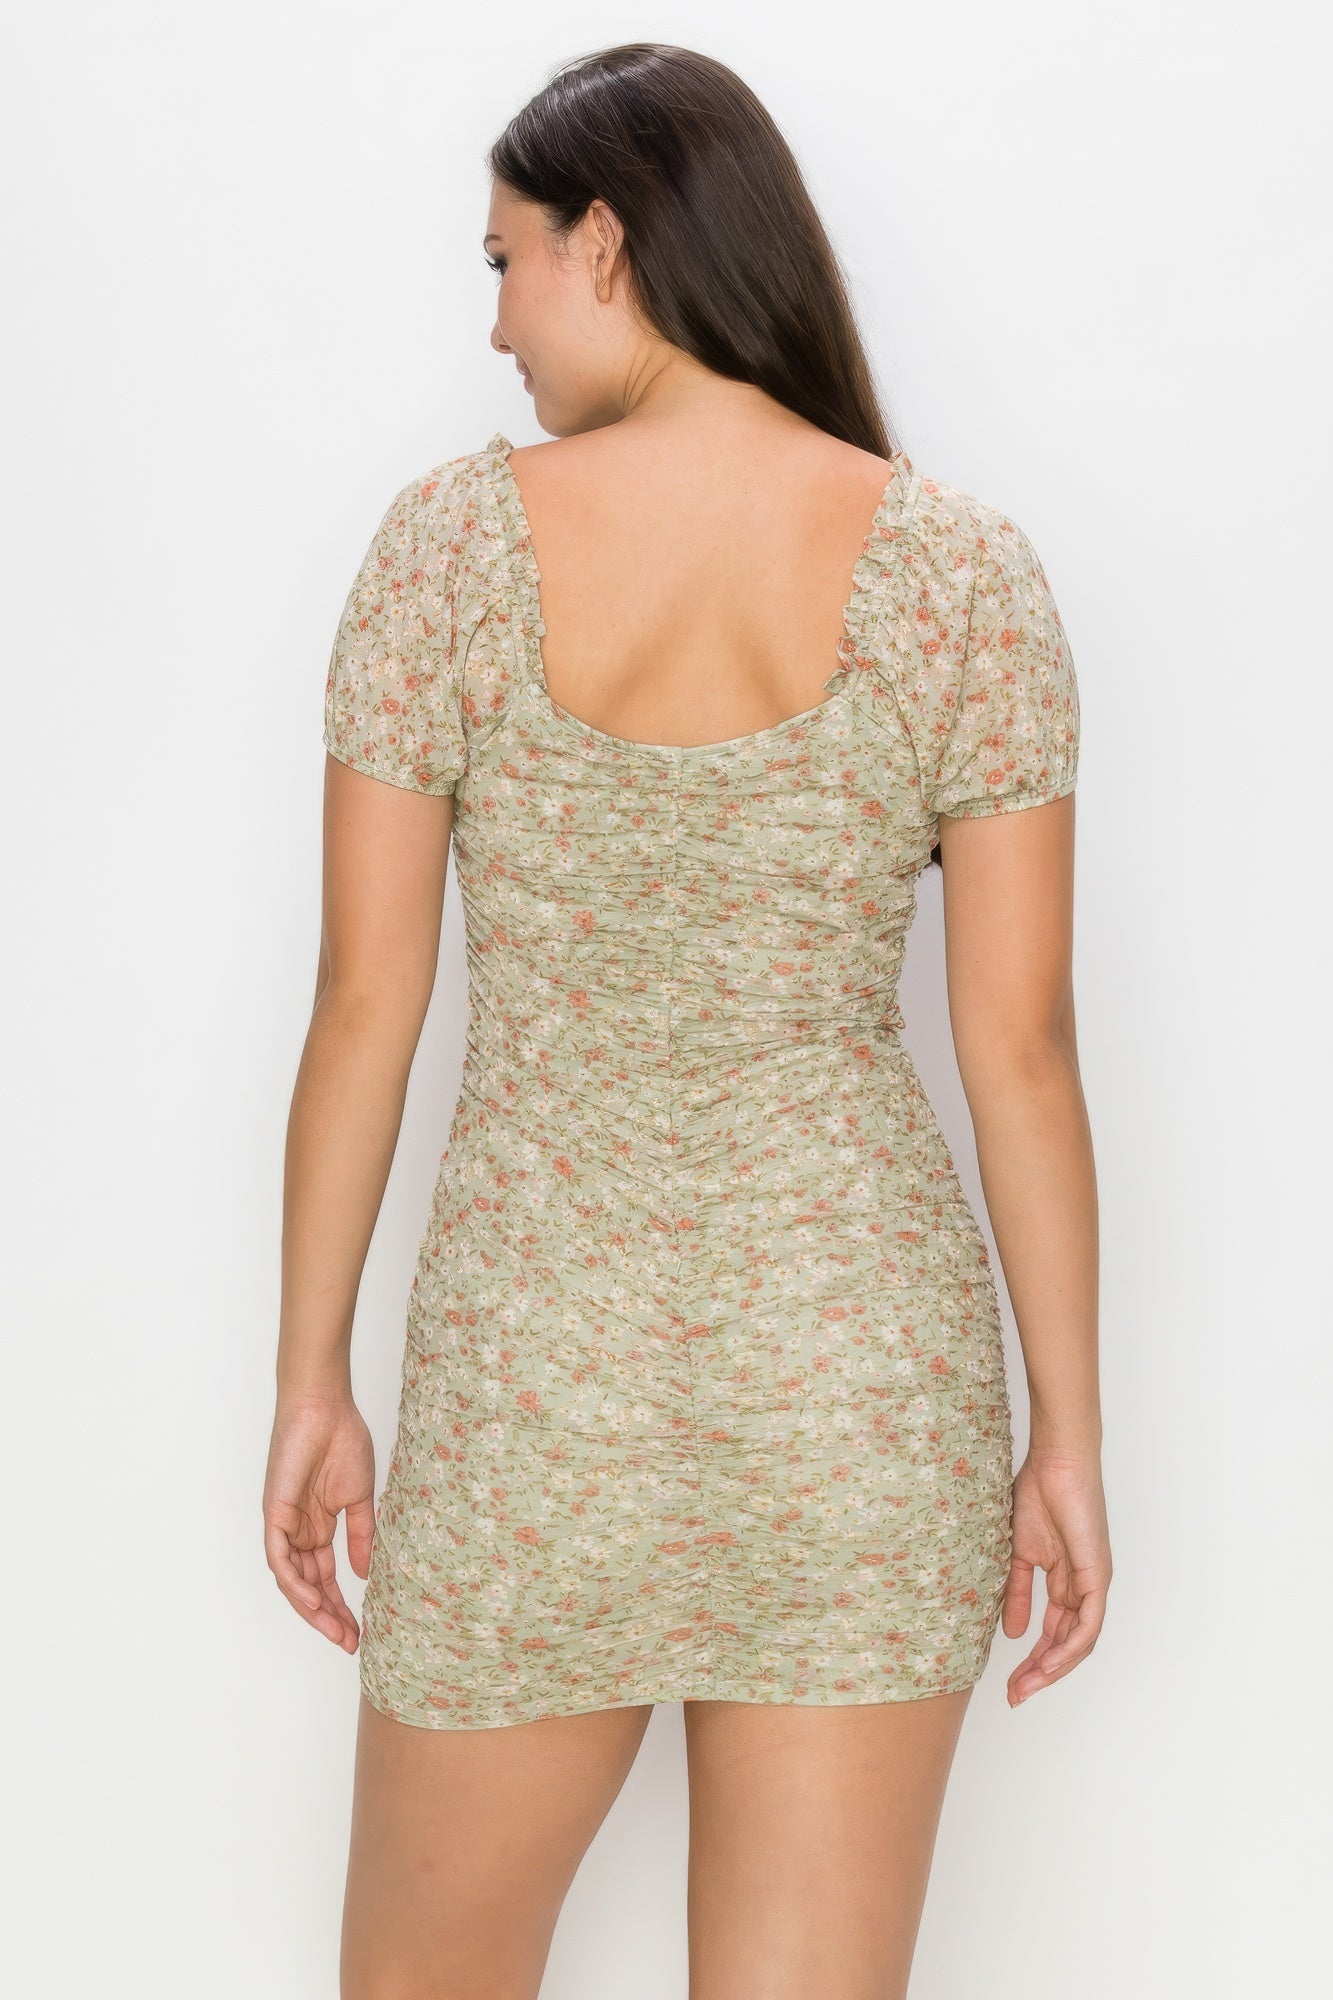 THE LILLI Ruched Floral Ruffled Bodycon Dress